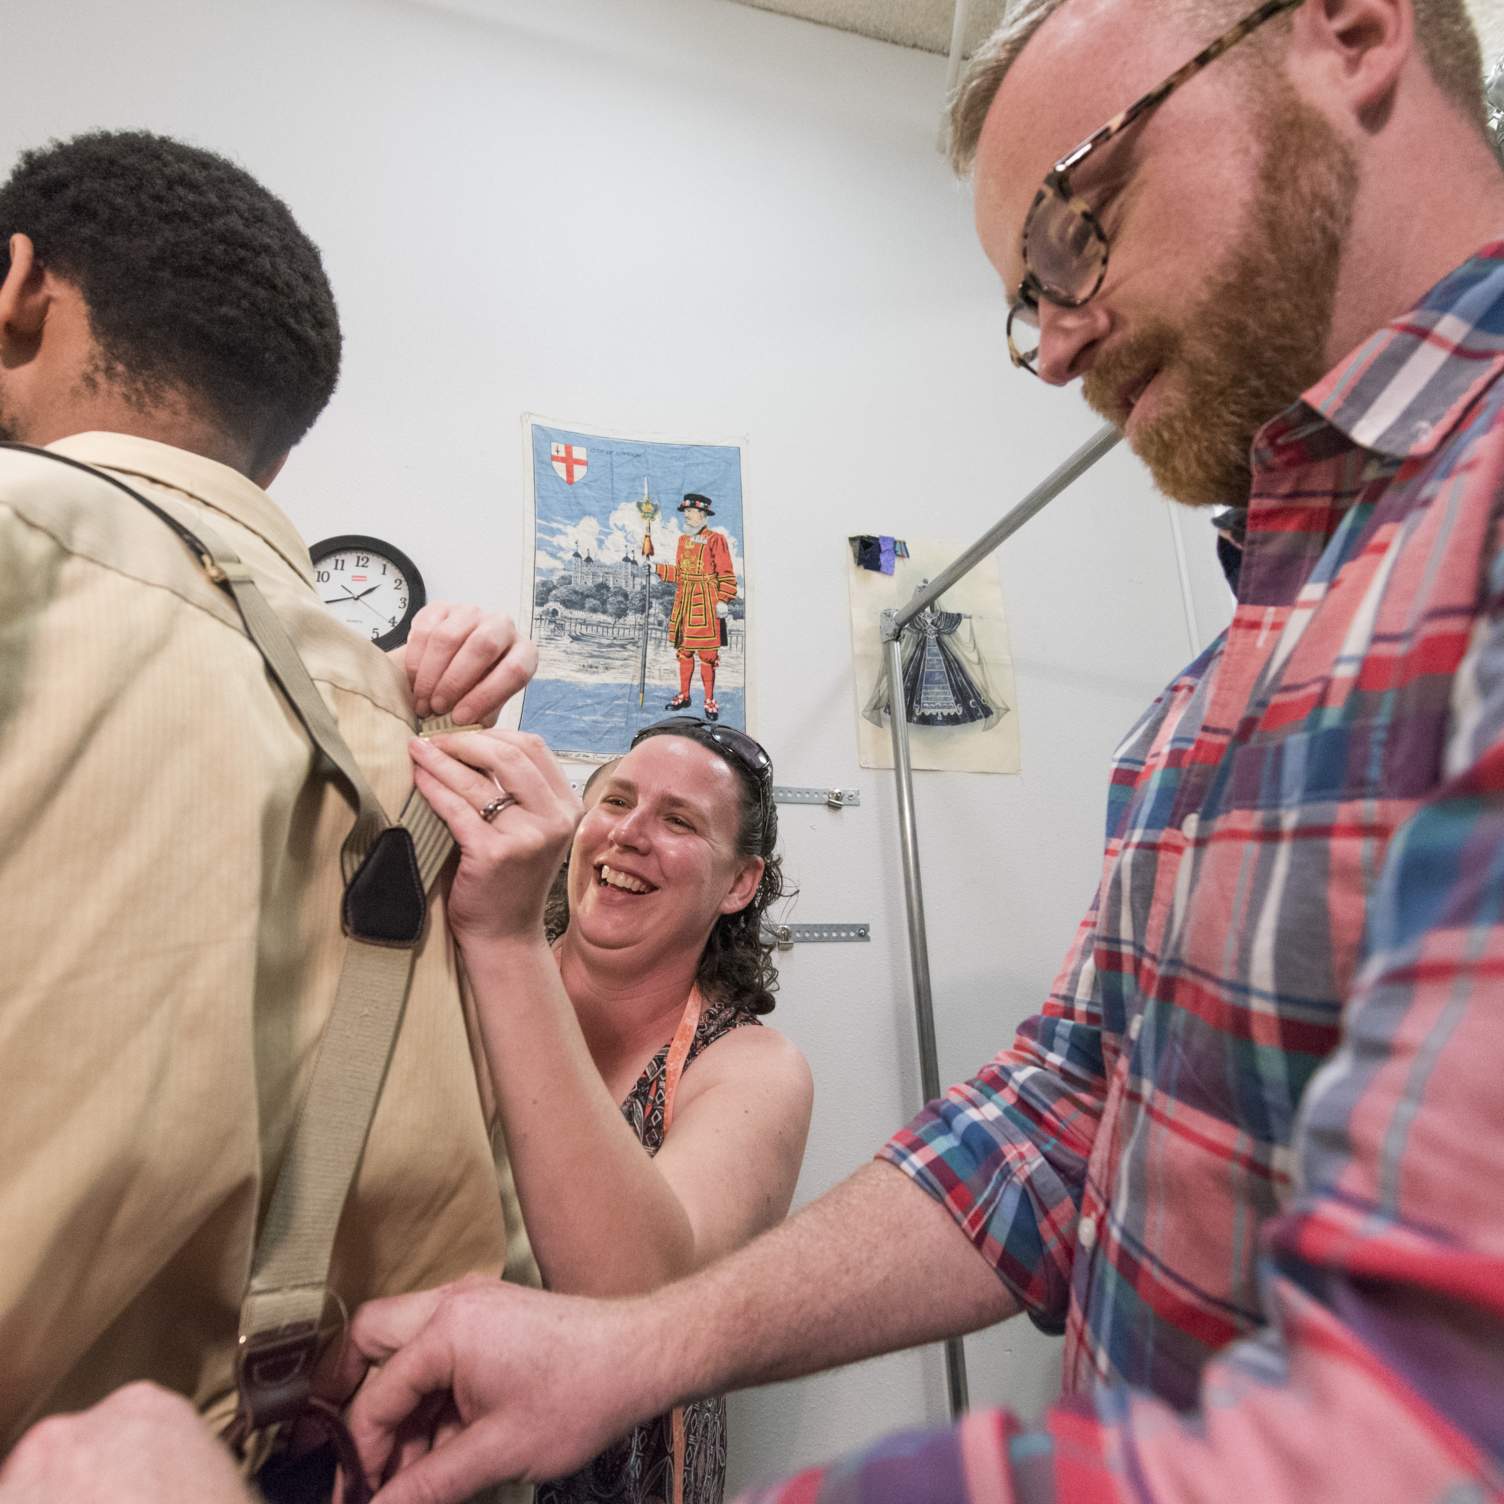 Professor adjusts suspenders on actor during a costume fitting